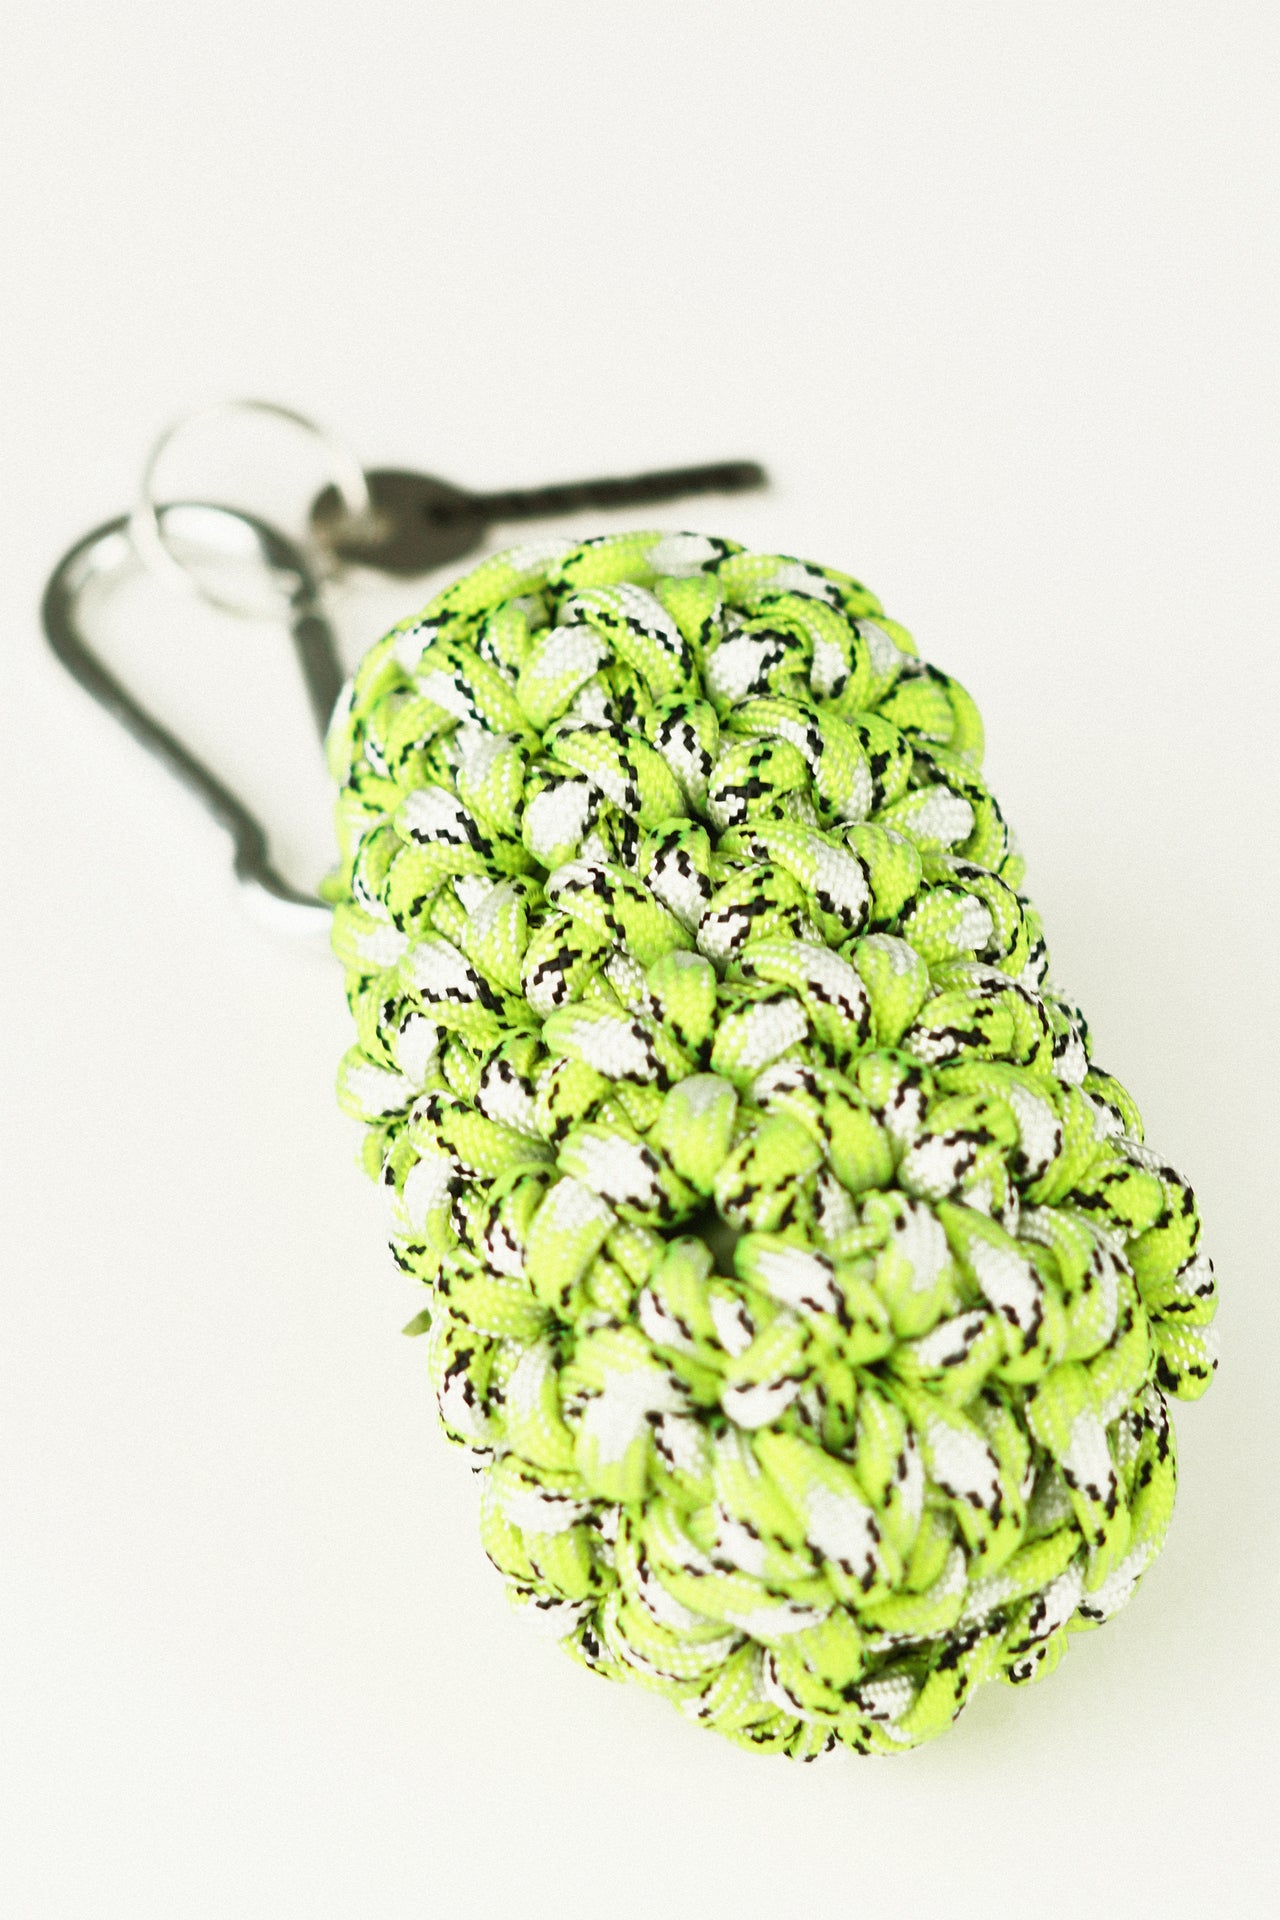 White and green pet bag holder made of paracord rope